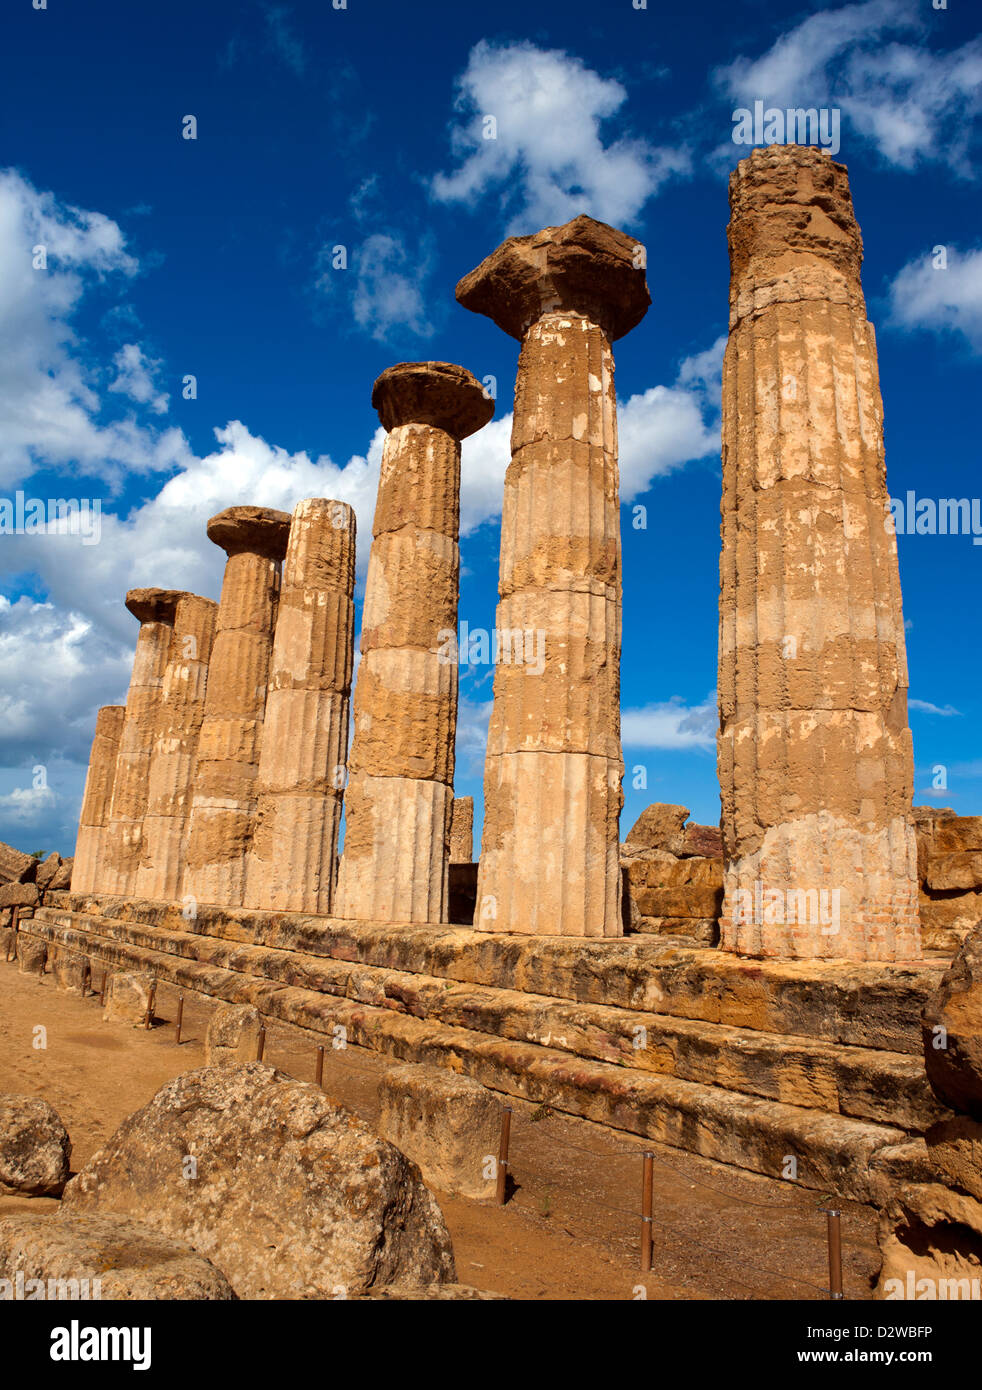 Temple of Hercules in the Valley of the Temples in Agrigento, Sicily, Italy. Stock Photo